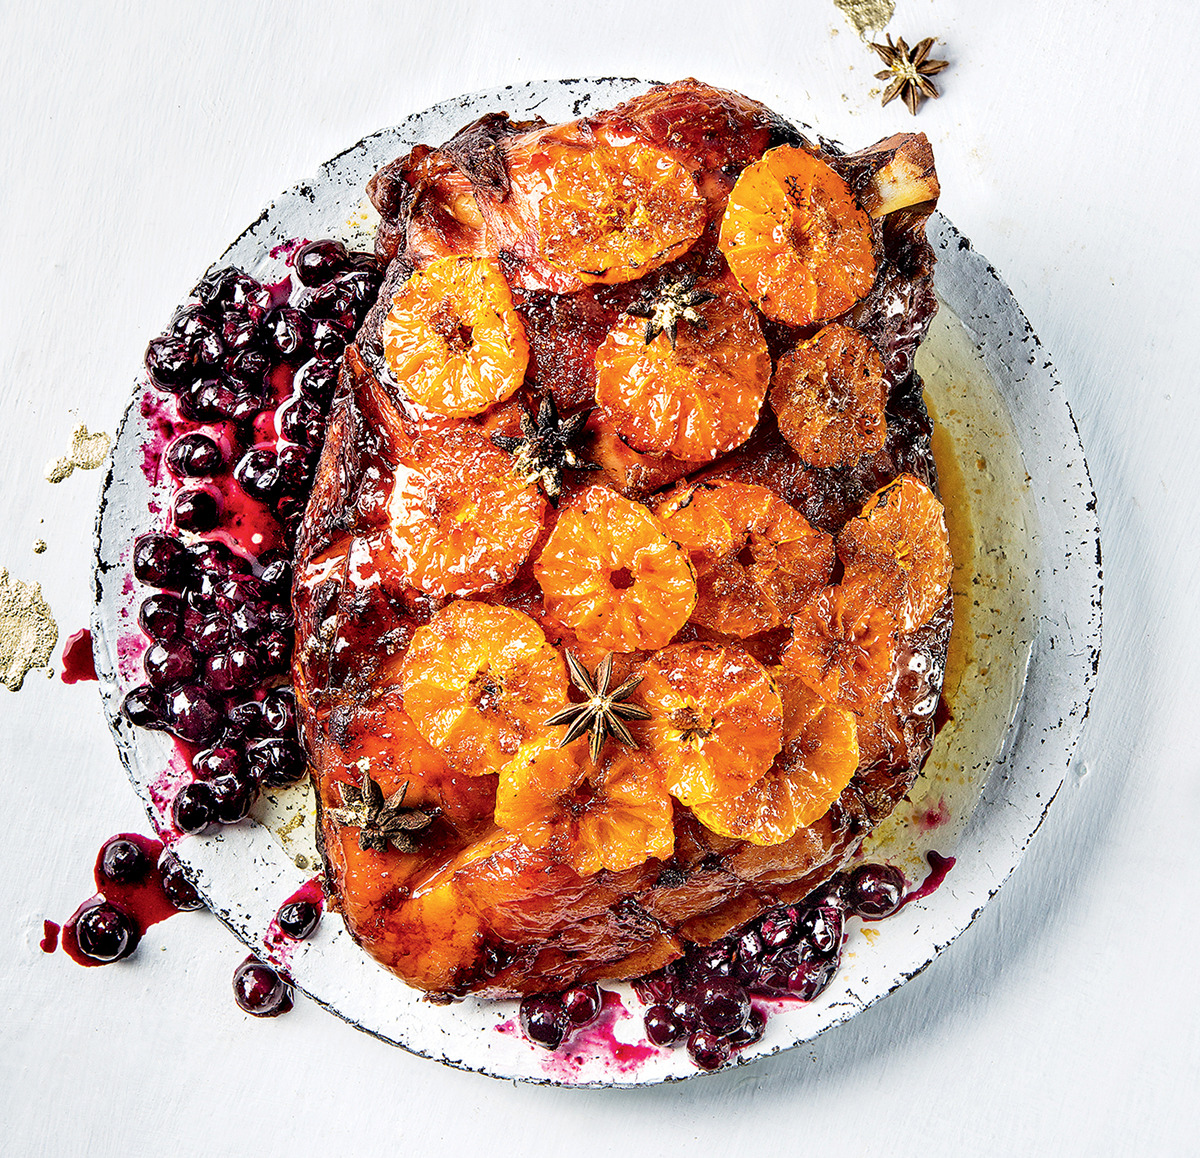 Naartjie-glazed gammon with blueberries and star anise recipe